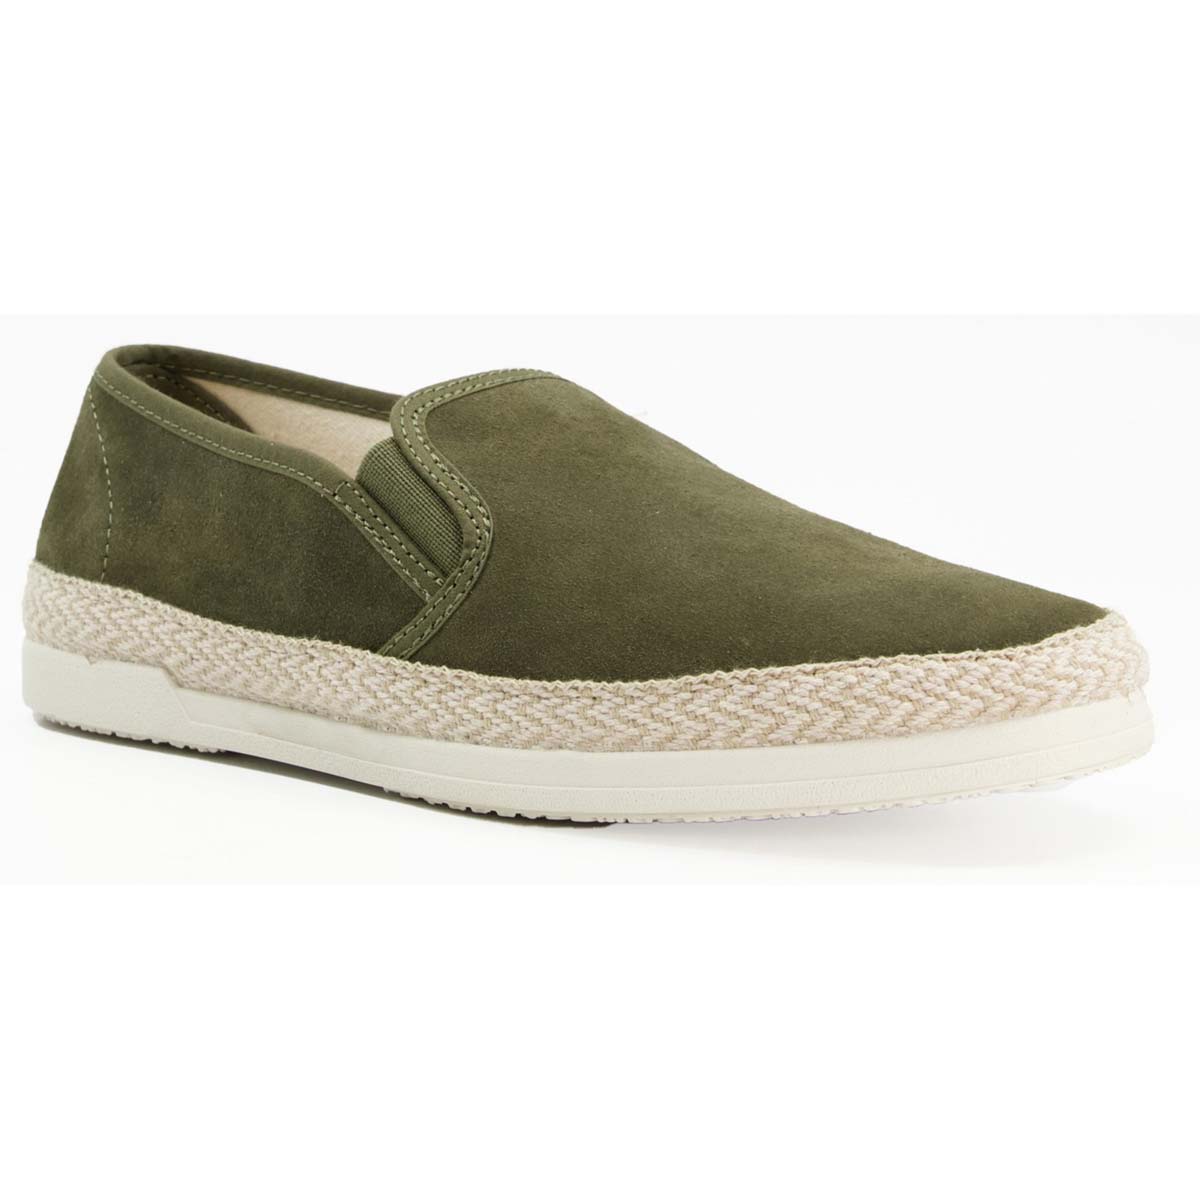 Dune London Francisco Khaki Mens Slip-on Shoes 1427509020002 in a Plain Leather in Size 11